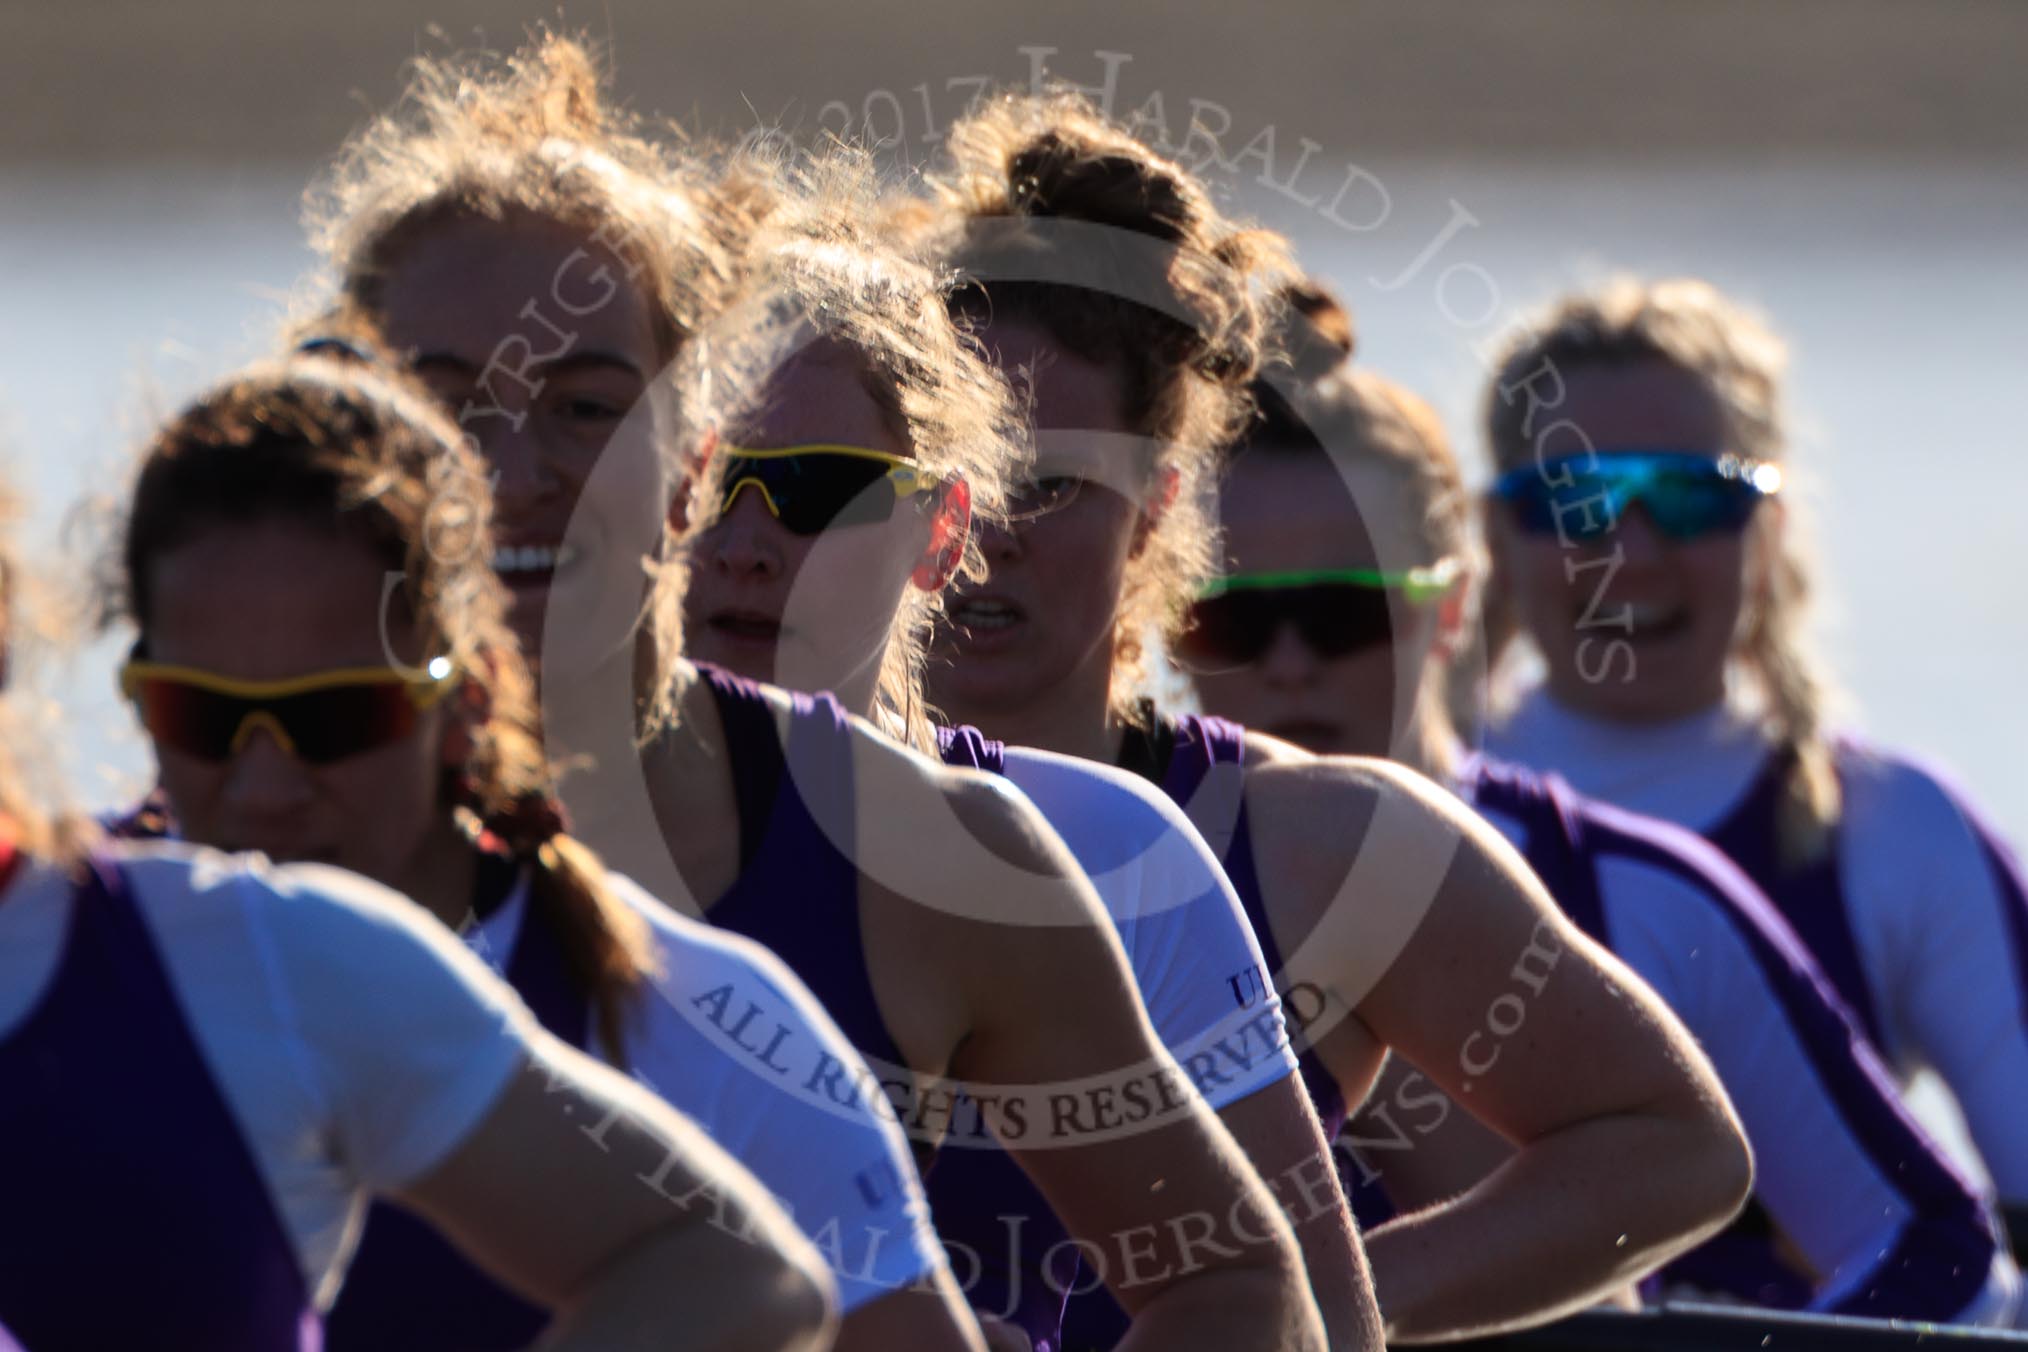 The Women's Boat Race season 2018 - fixture CUWBC vs. ULBC: A backlit shot of the ULBC Eight - 6 Oonagh Cousins, 5 Hannah Roberts, 4 Katherine Barnhill, 3 Fionnuala Gannon, 2 Robyn Hart-Winks, bow Ally French.
River Thames between Putney Bridge and Mortlake,
London SW15,

United Kingdom,
on 17 February 2018 at 13:30, image #128